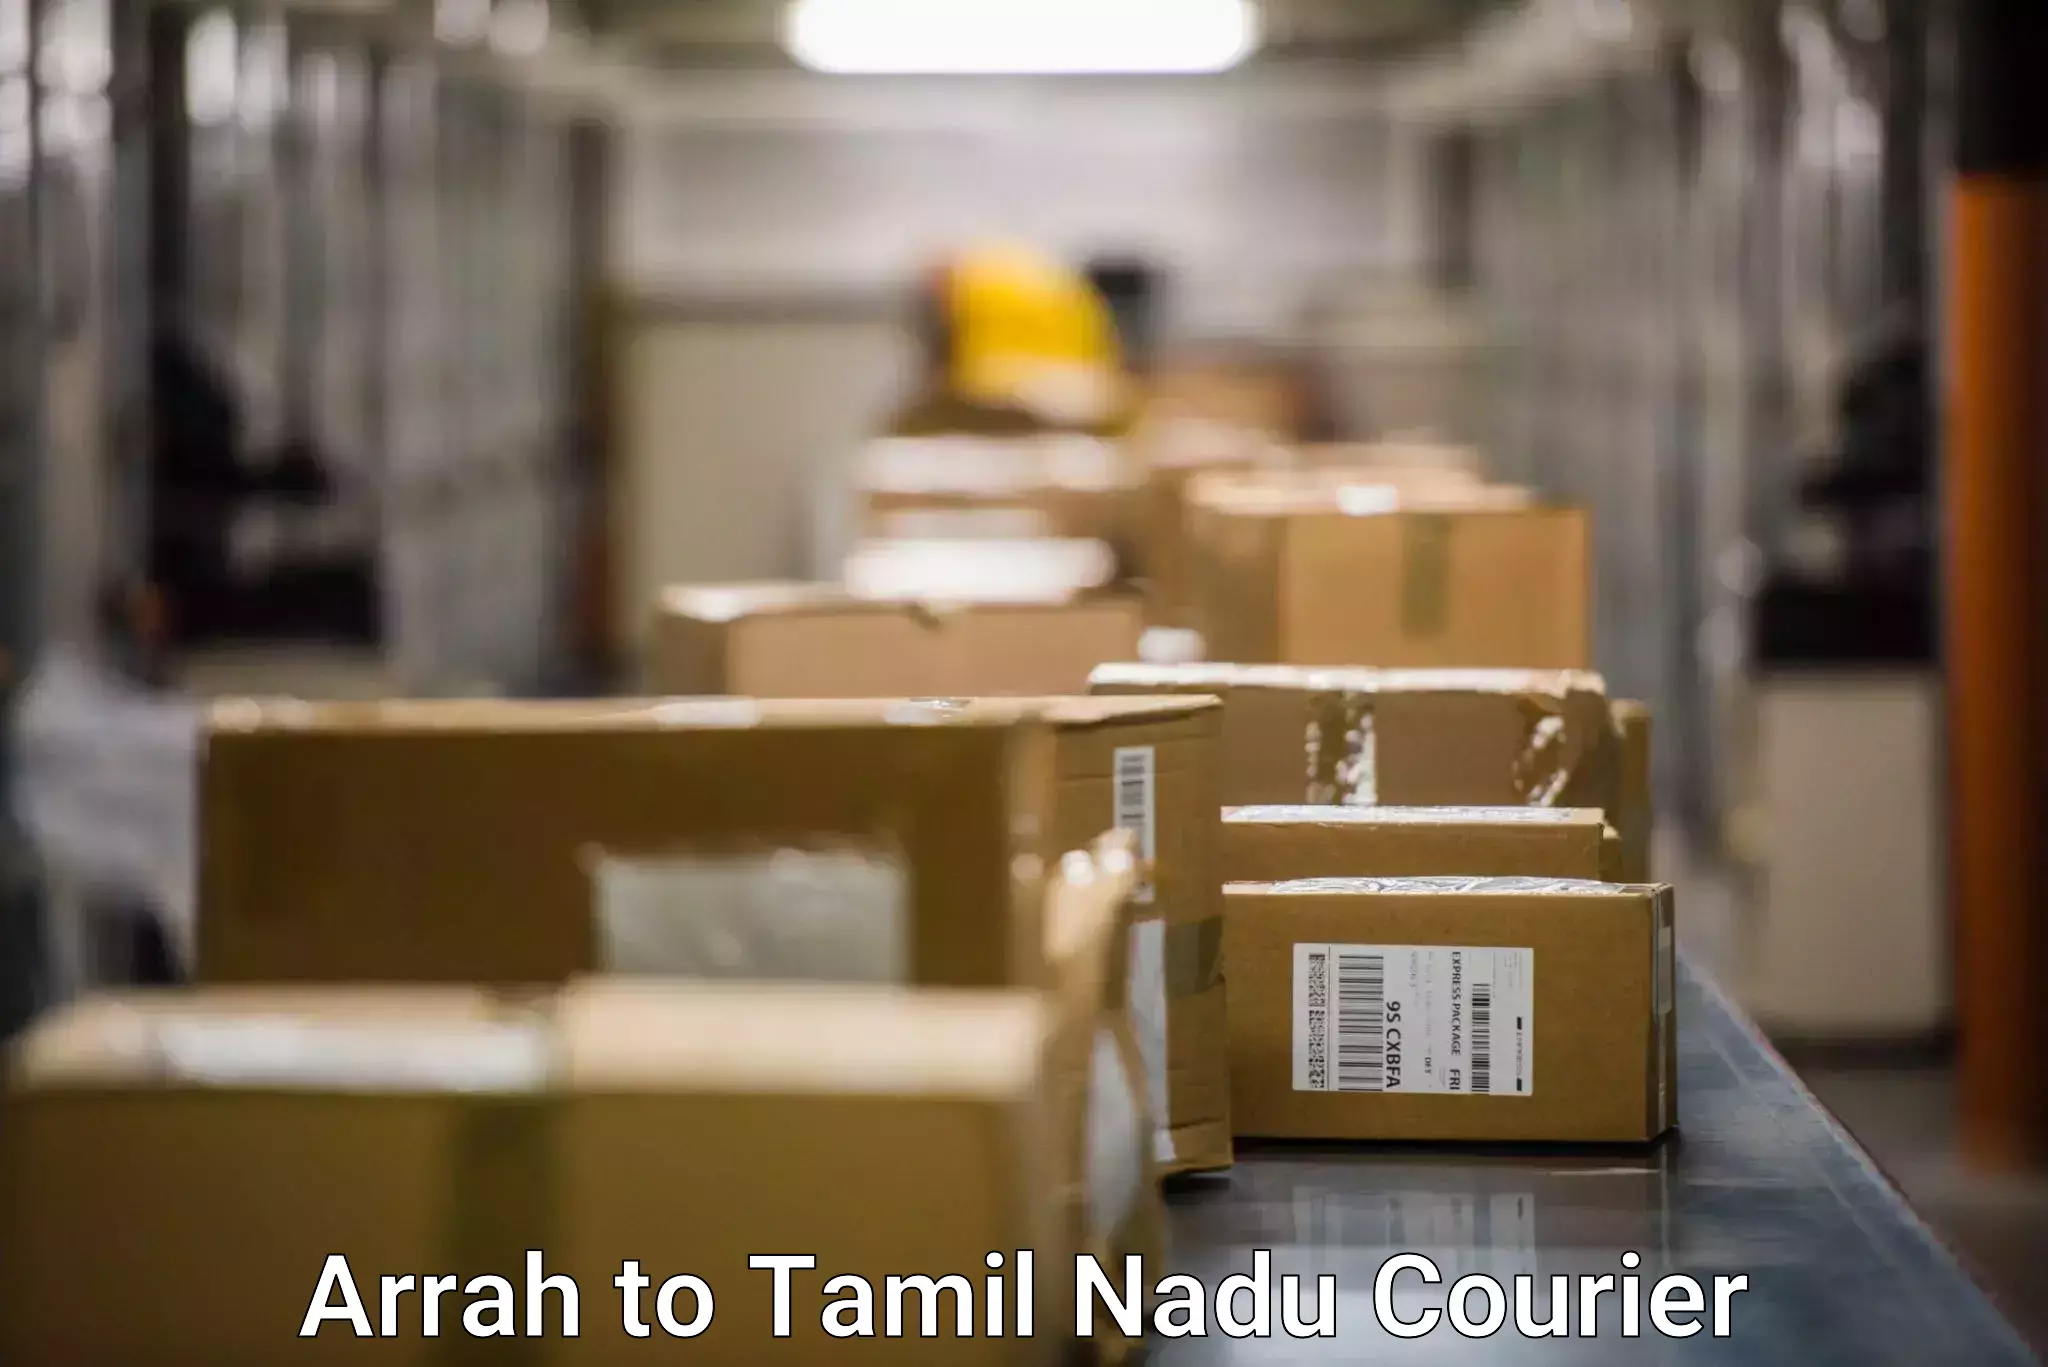 Local delivery service Arrah to Tamil Nadu